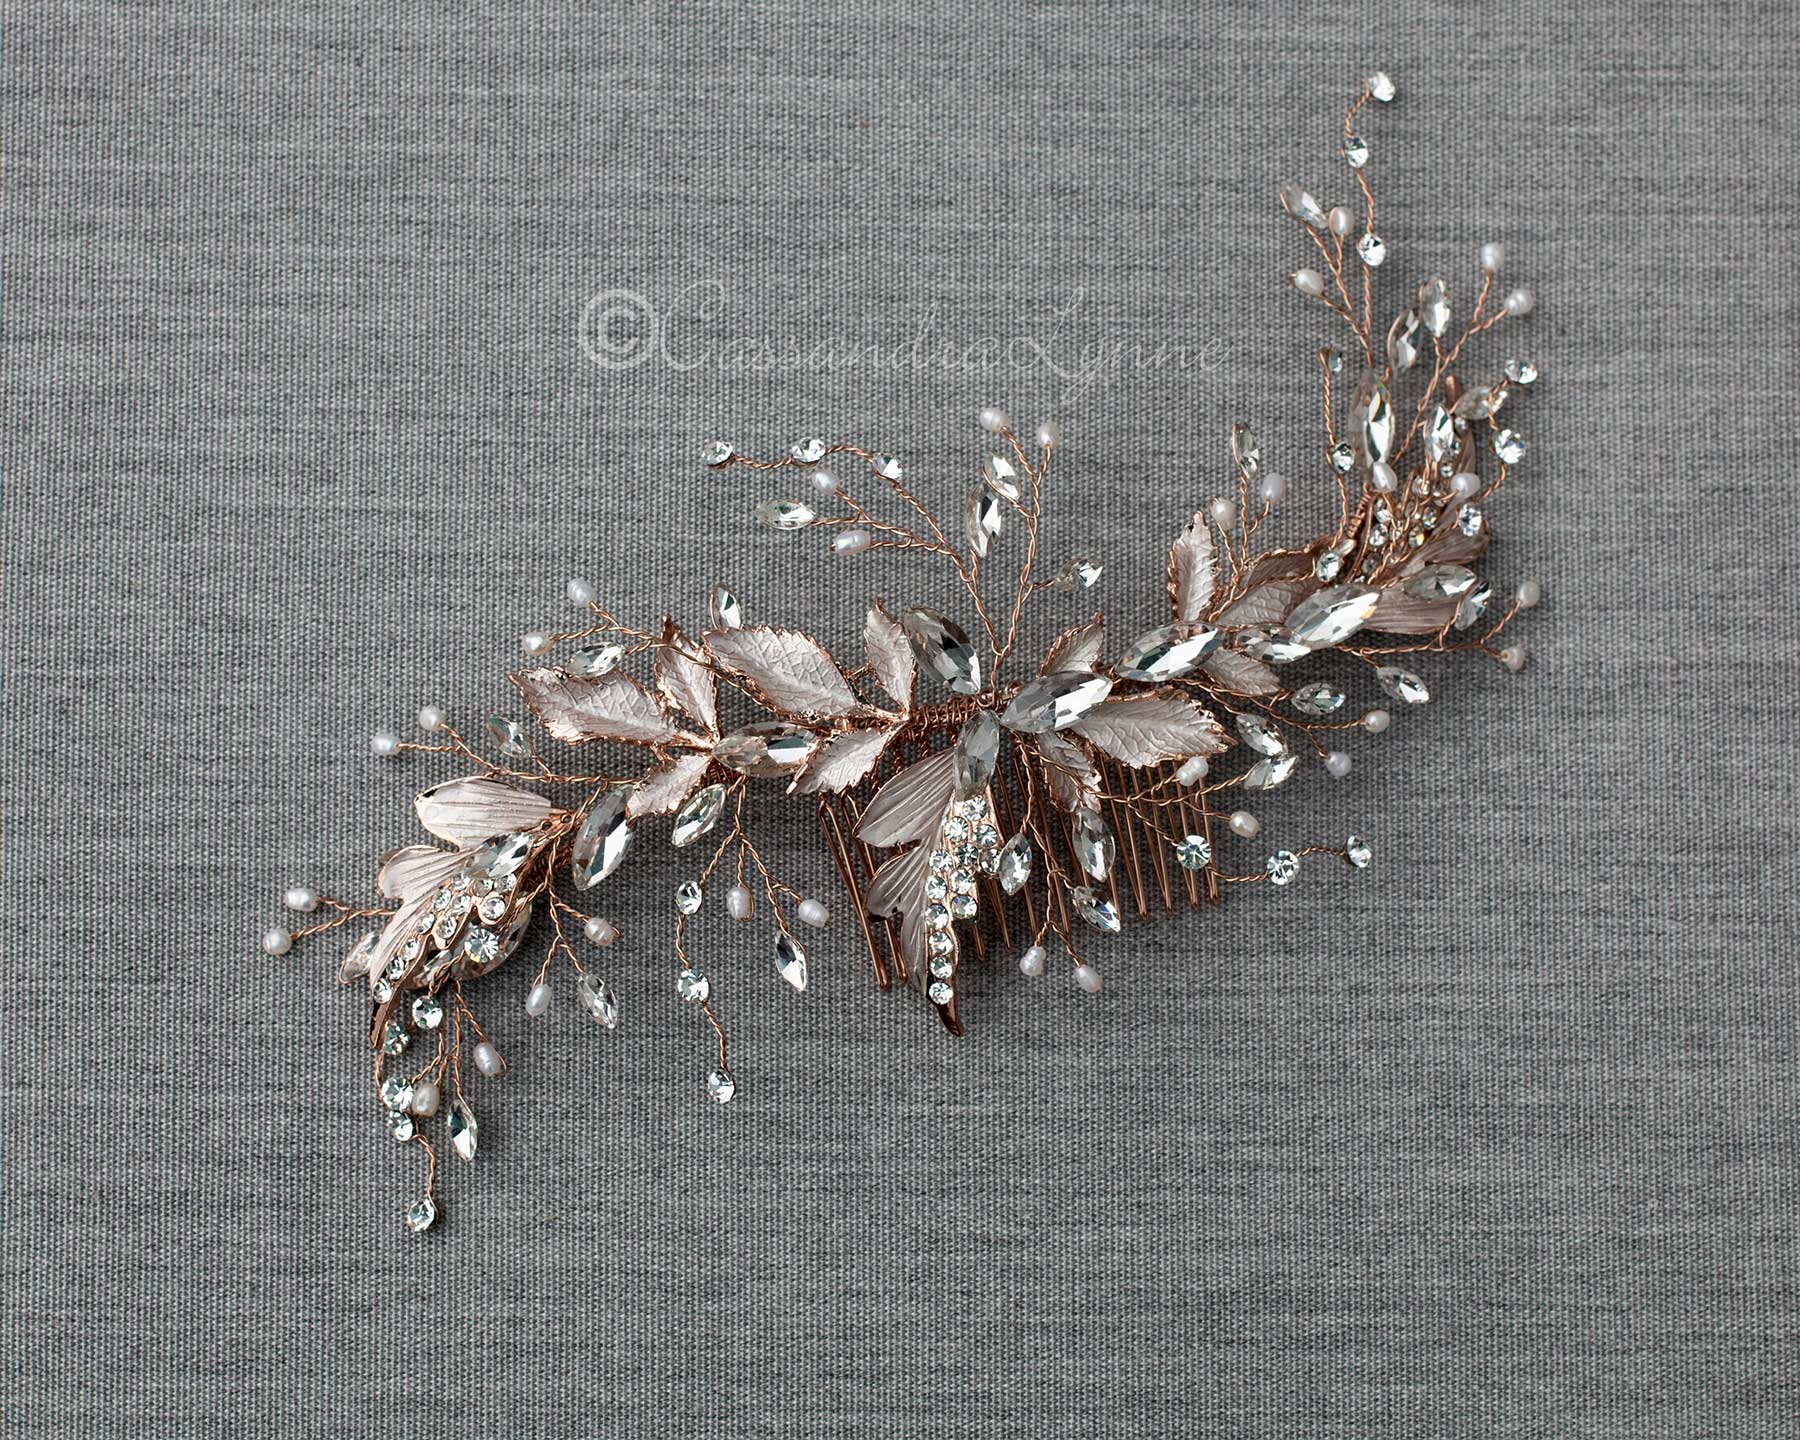 Frosted Leaves and Tiny Pearls Wedding Comb - Cassandra Lynne